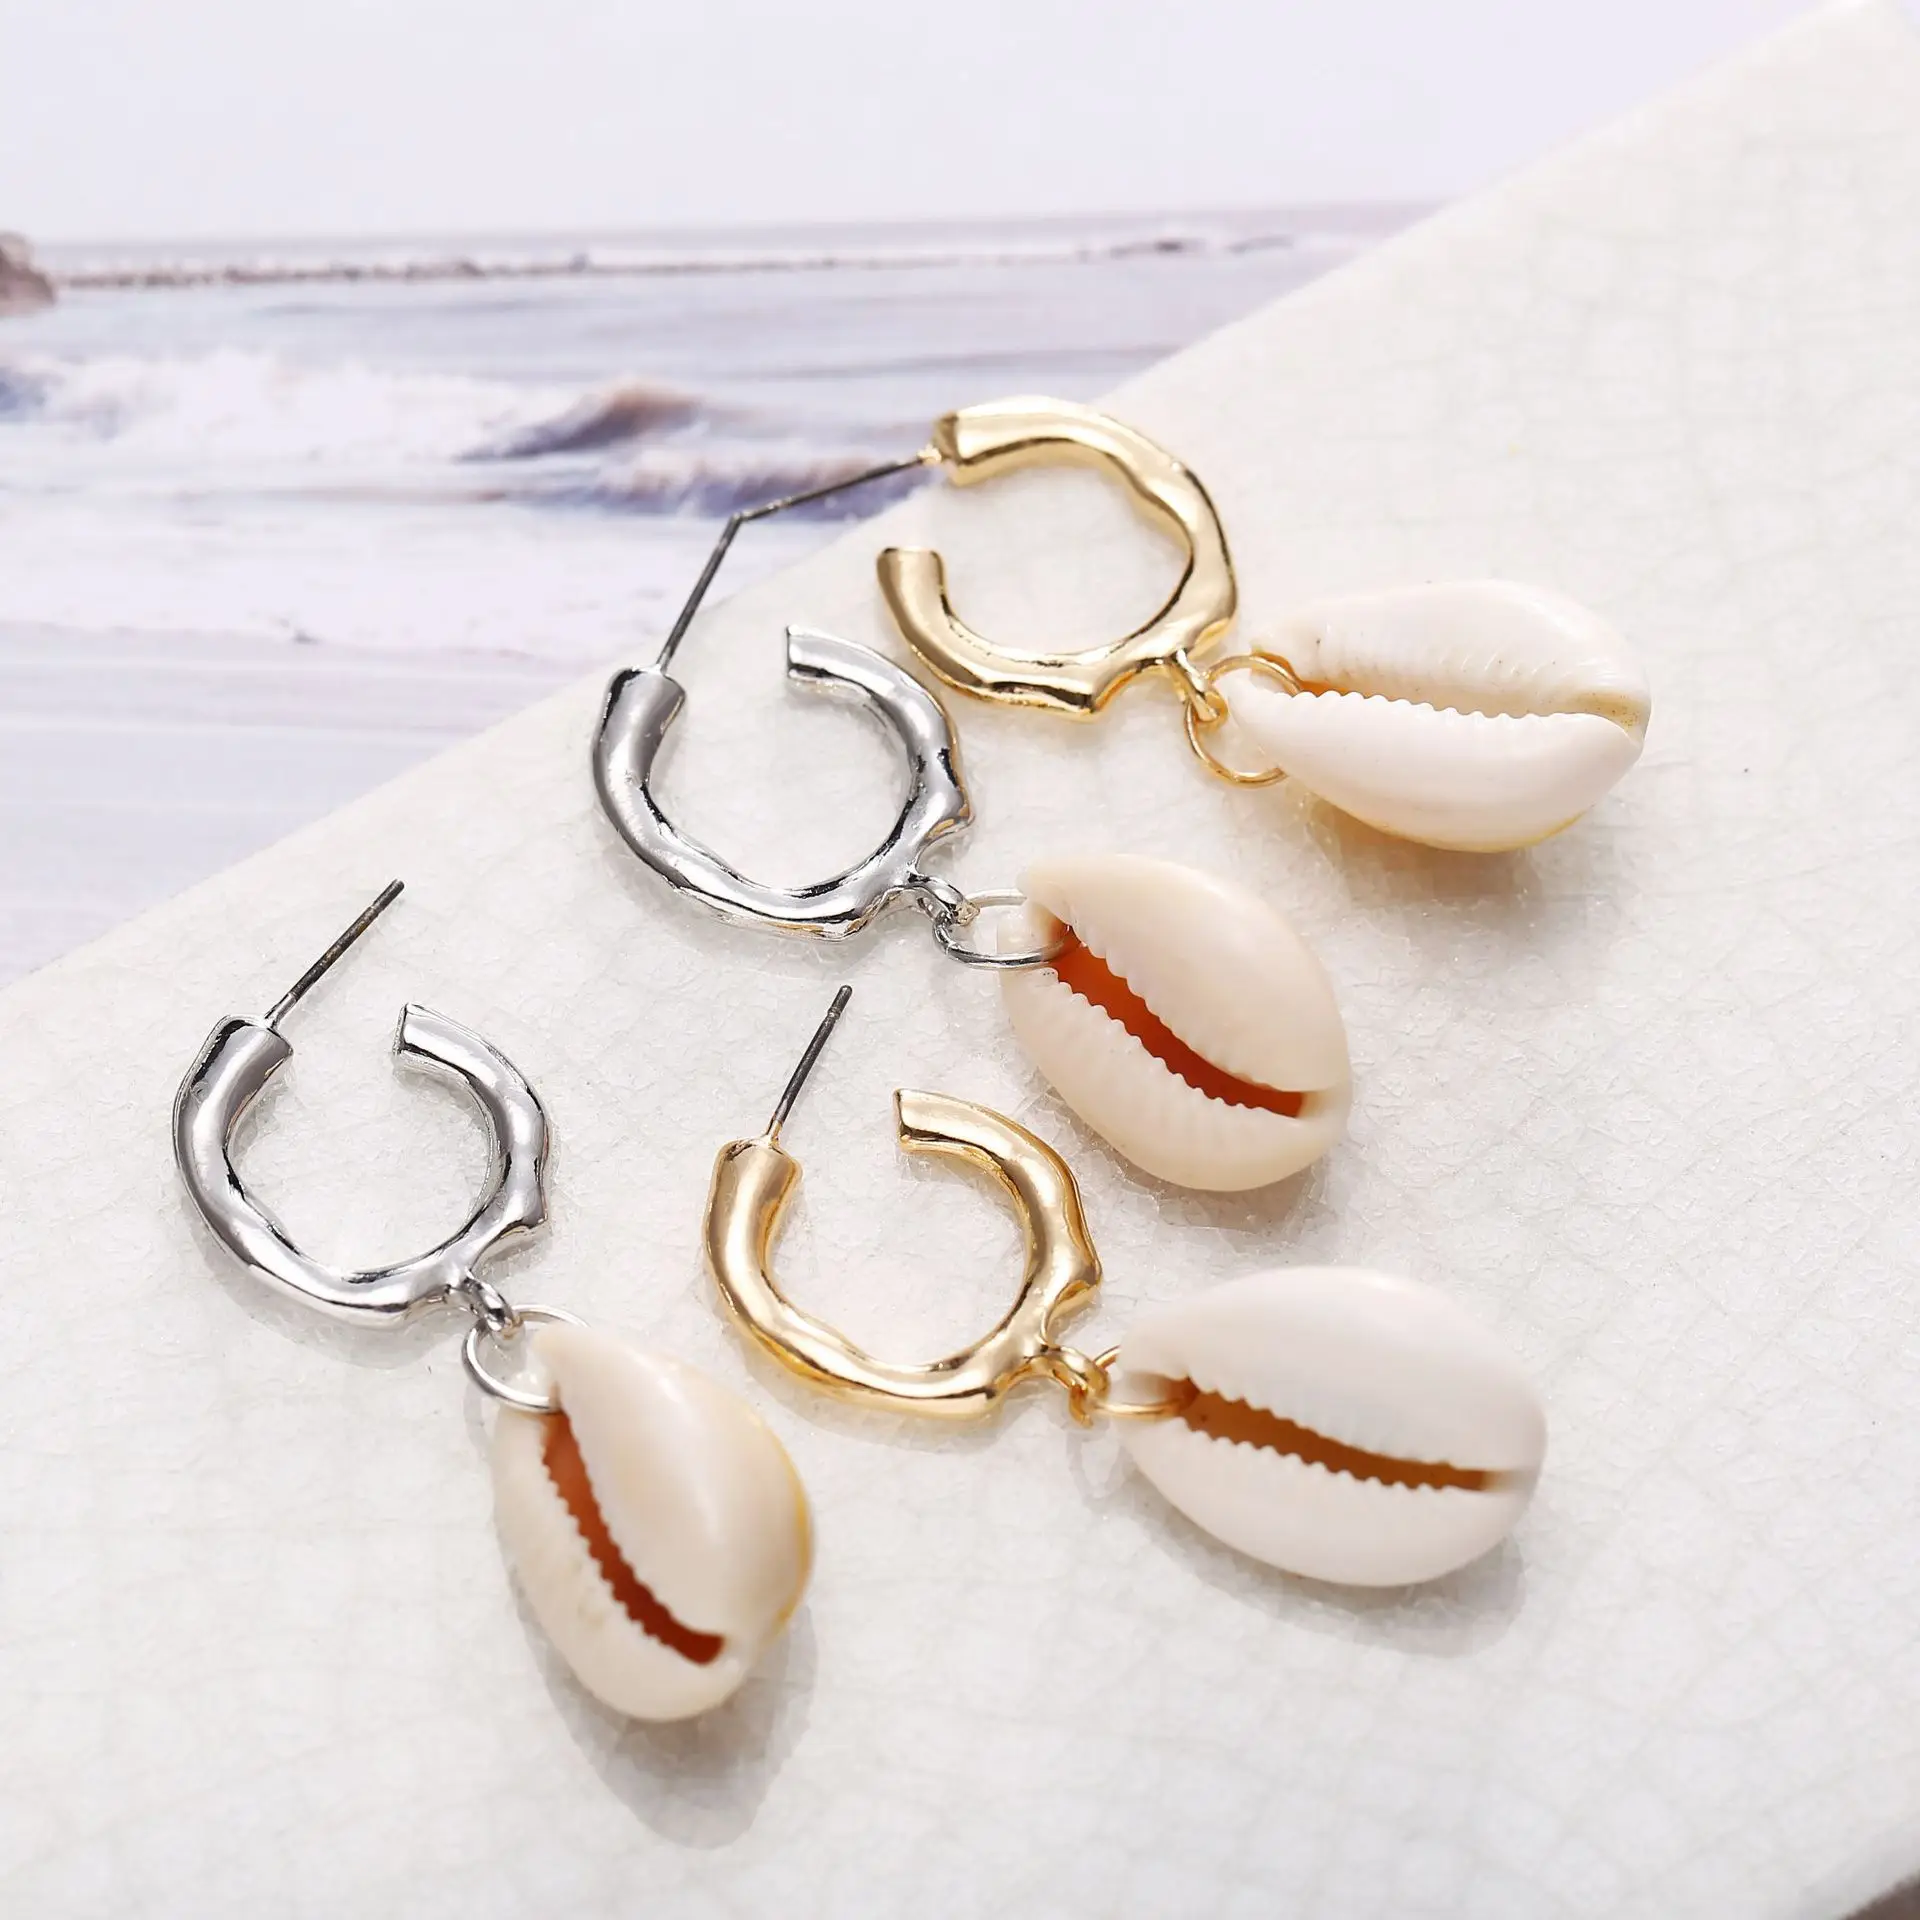 

Modyle 28 Style Sea Shell Earrings For Women Gold Silver Color Metal Shell Cowrie Statement Earrings 2019 Summer Beach Jewelry